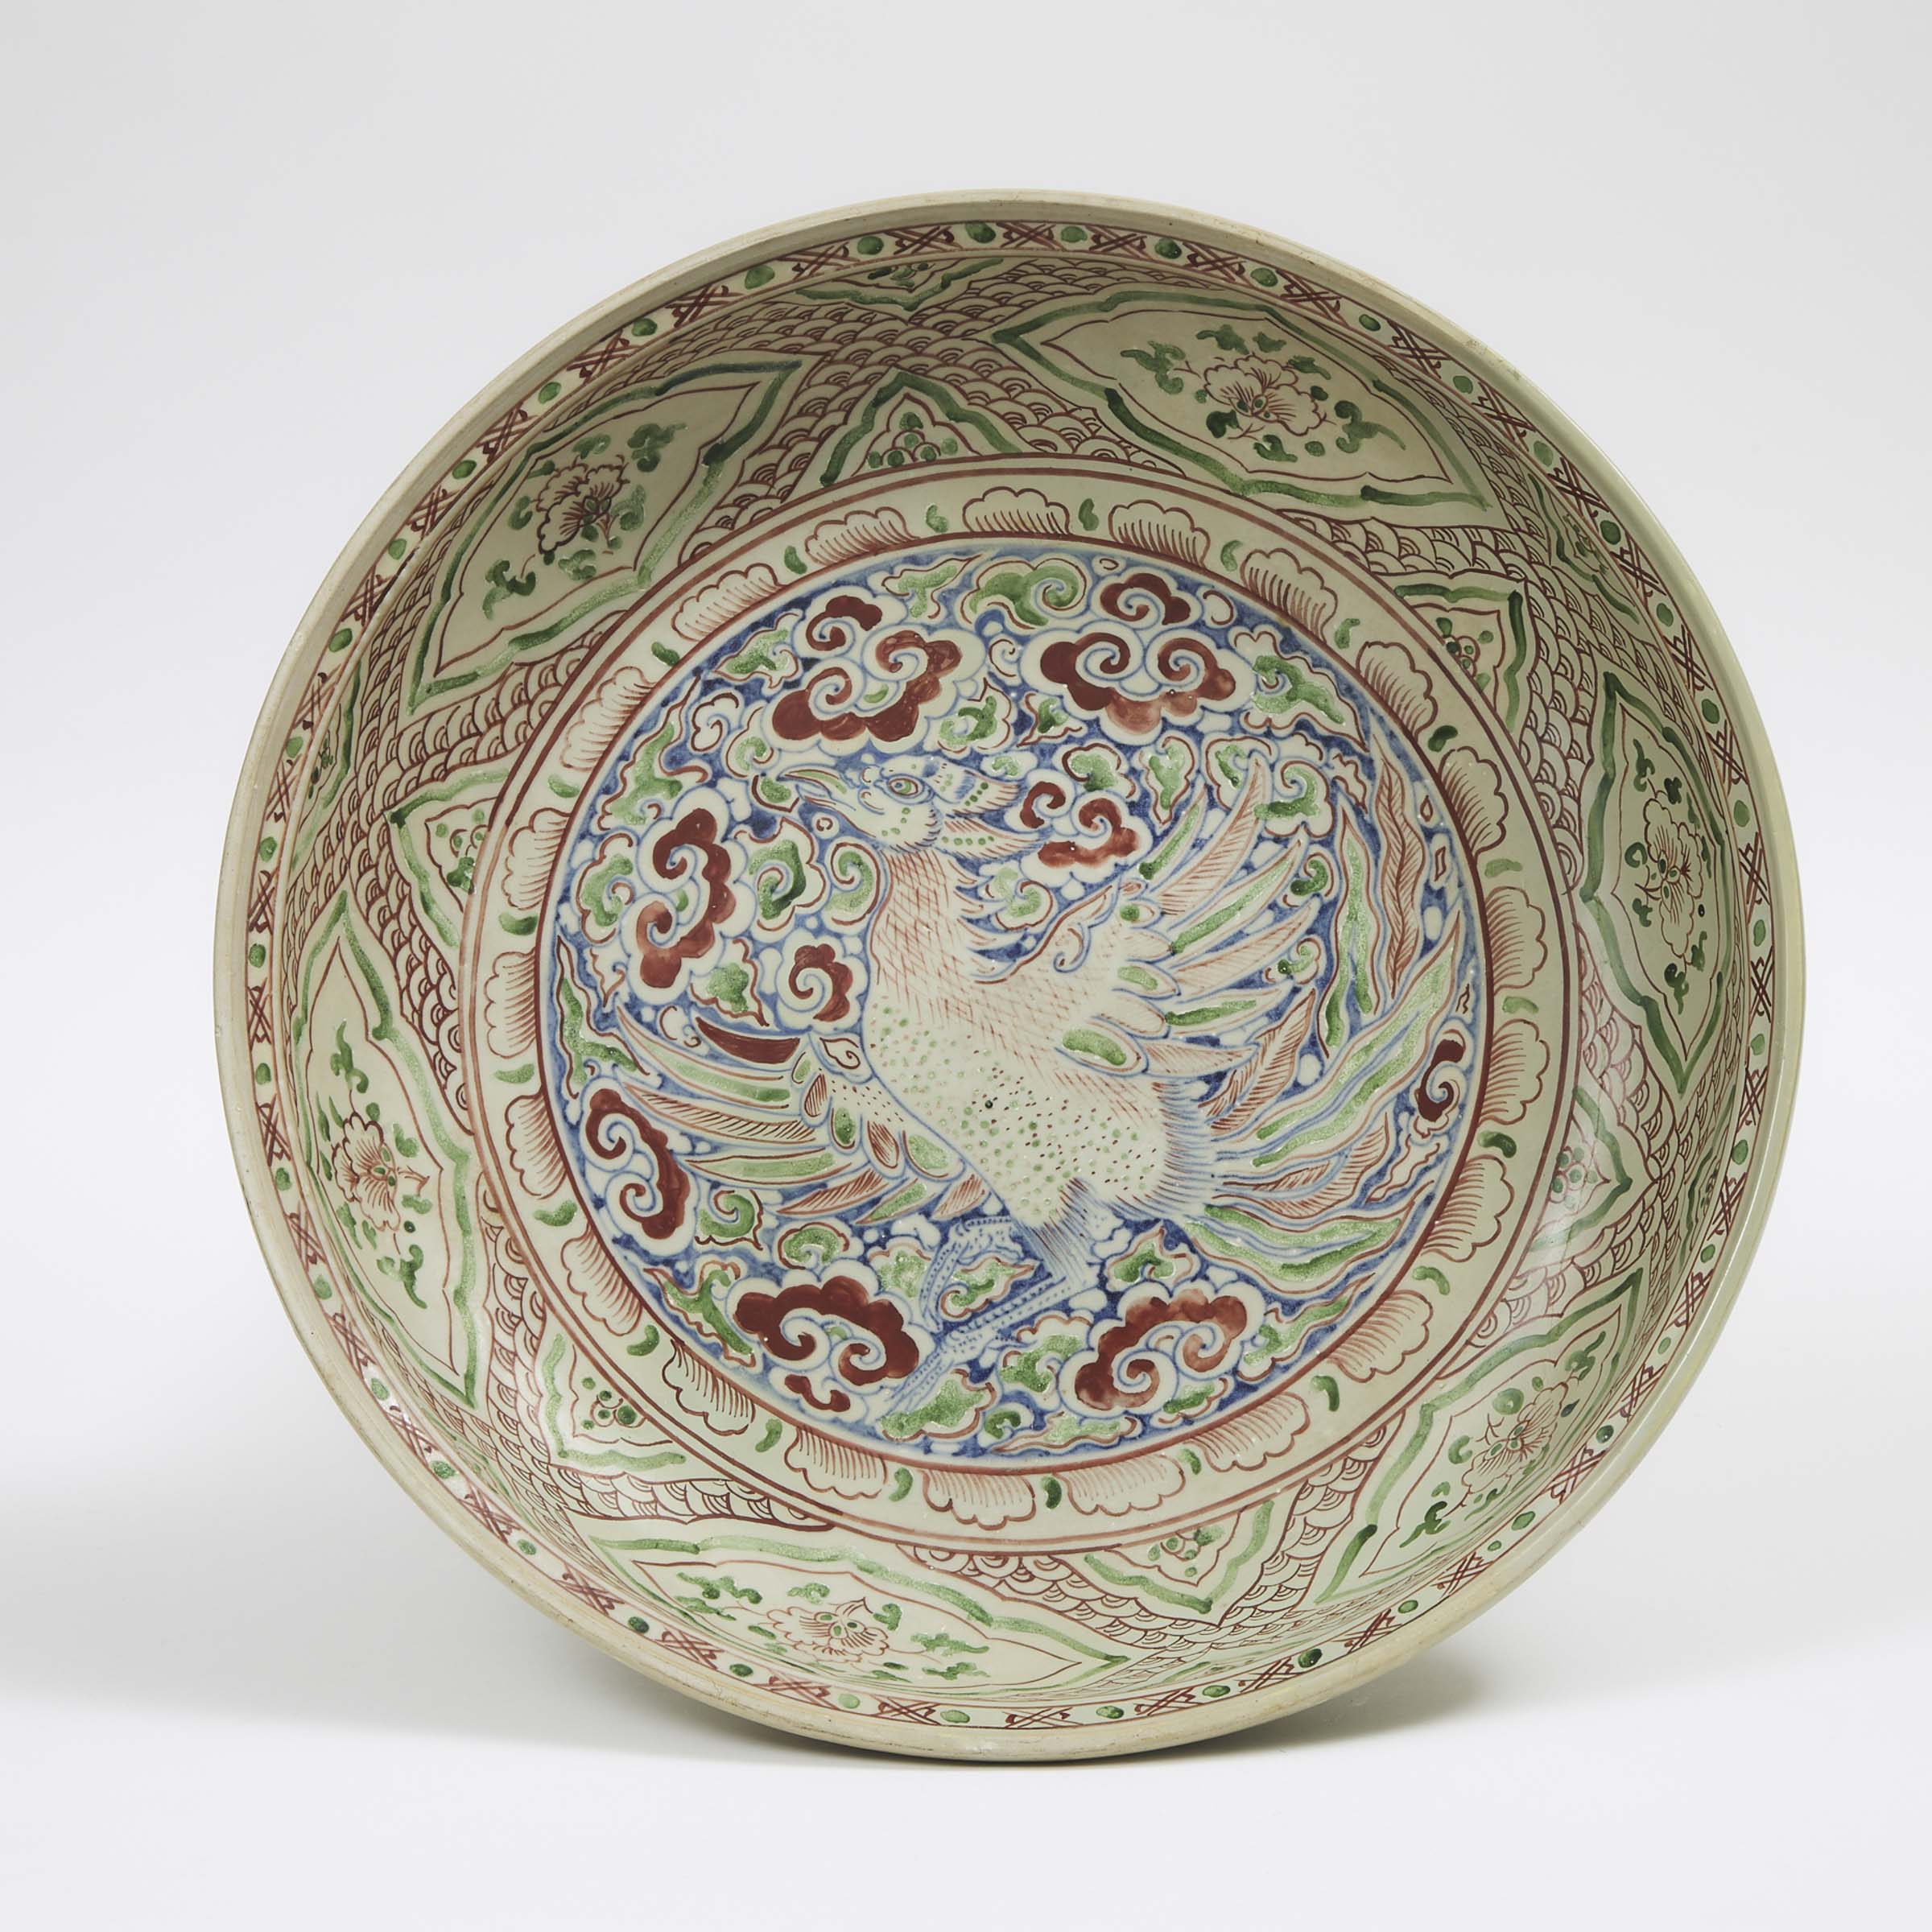 A Large Polychrome Ceramic 'Bird and Clouds' Charger, Vietnam, 15th/16th Century